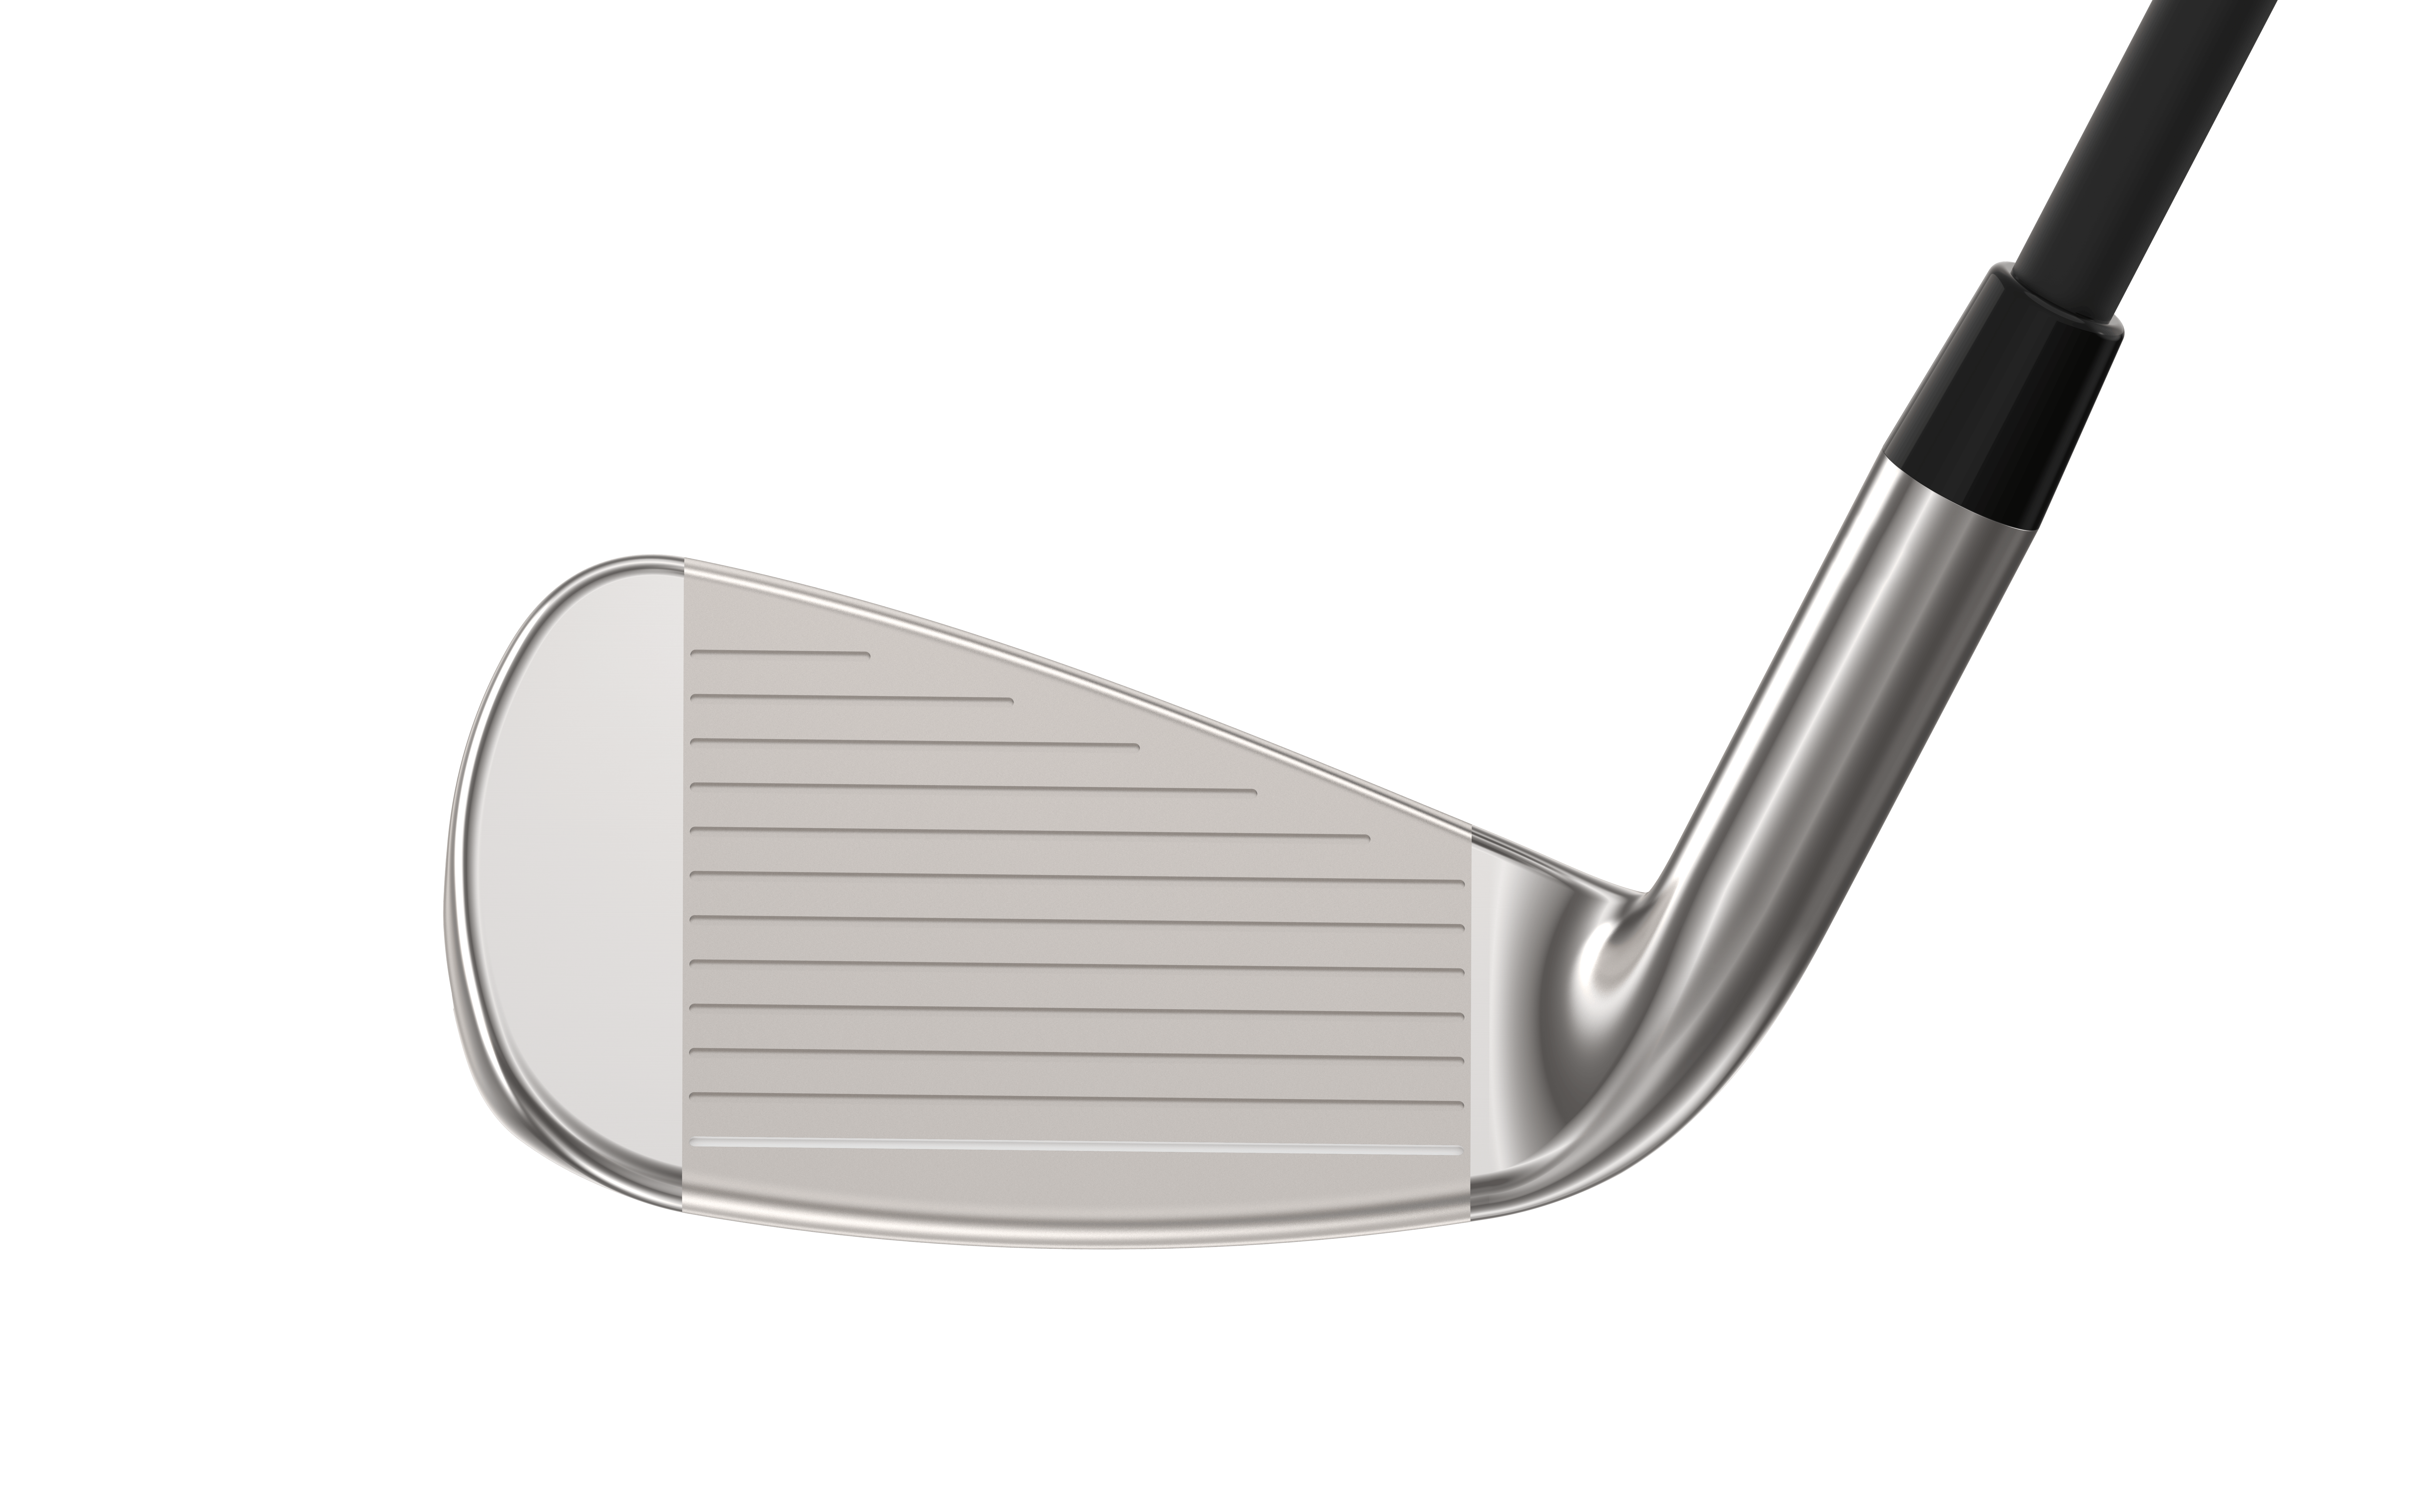 Cleveland Launcher XL Halo Irons · Right handed · Graphite · Regular · 5-PW, DW